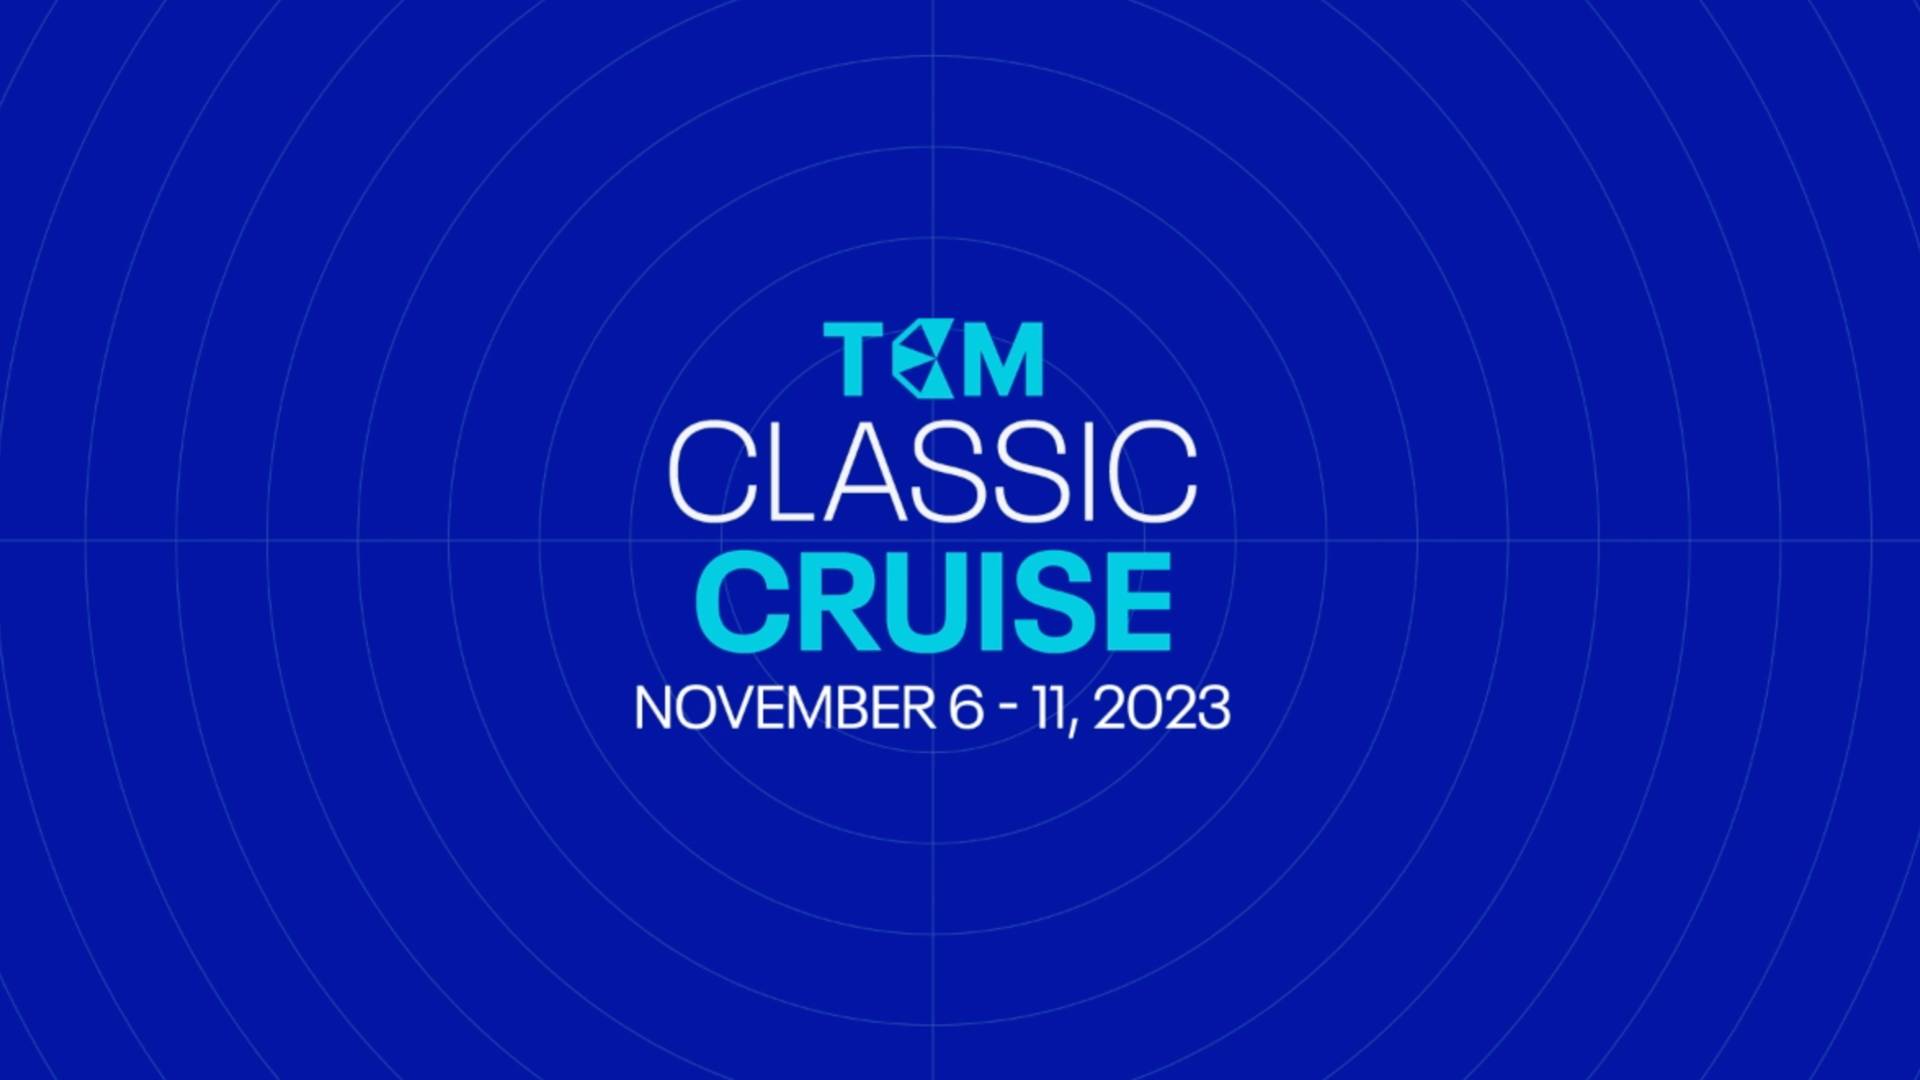 TCM Classic Cruise Returns in 2023 With Brand New West Coast